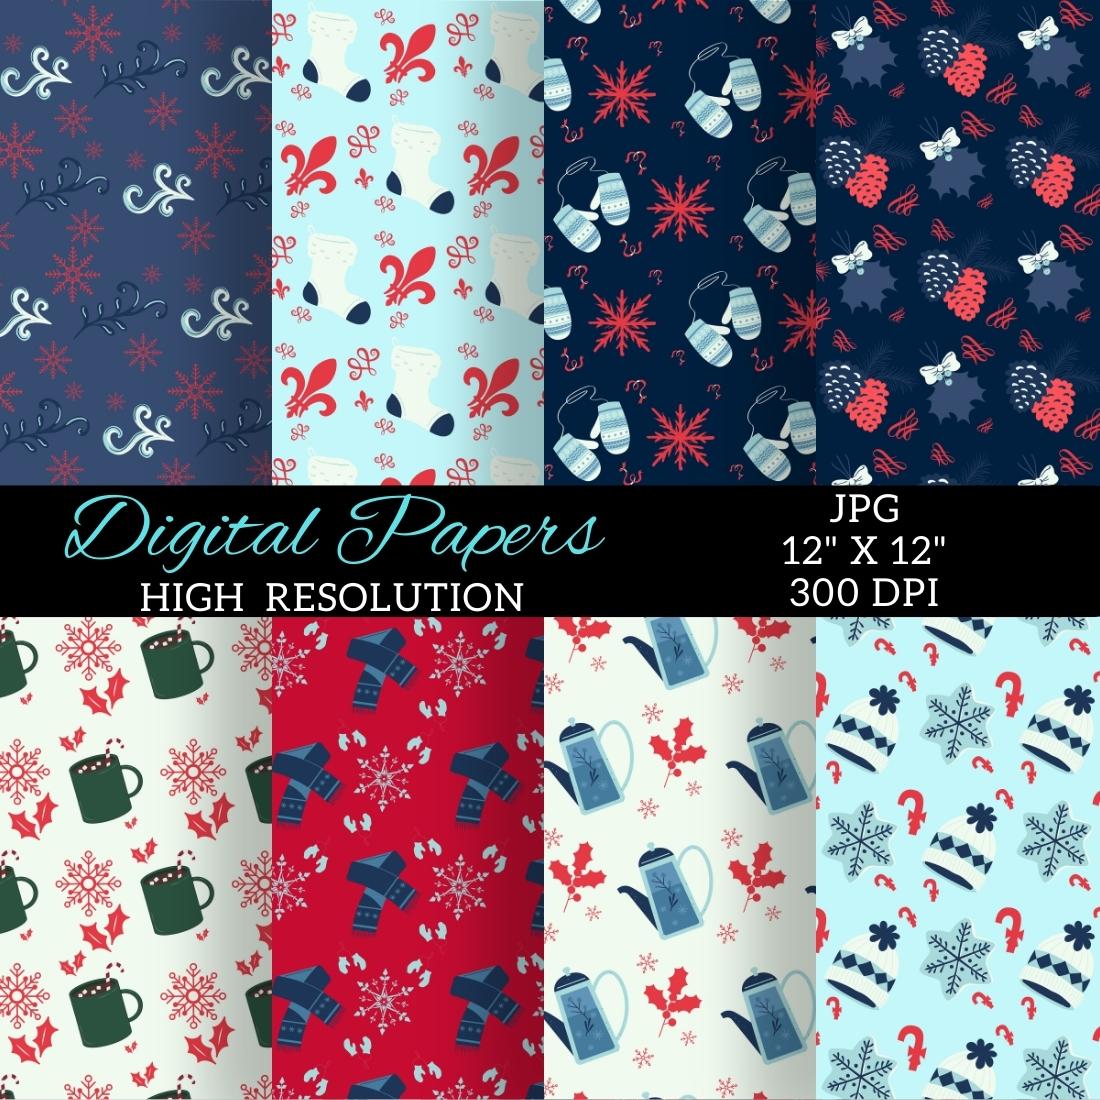 Winter Patterns Graphics Illustration cover image.